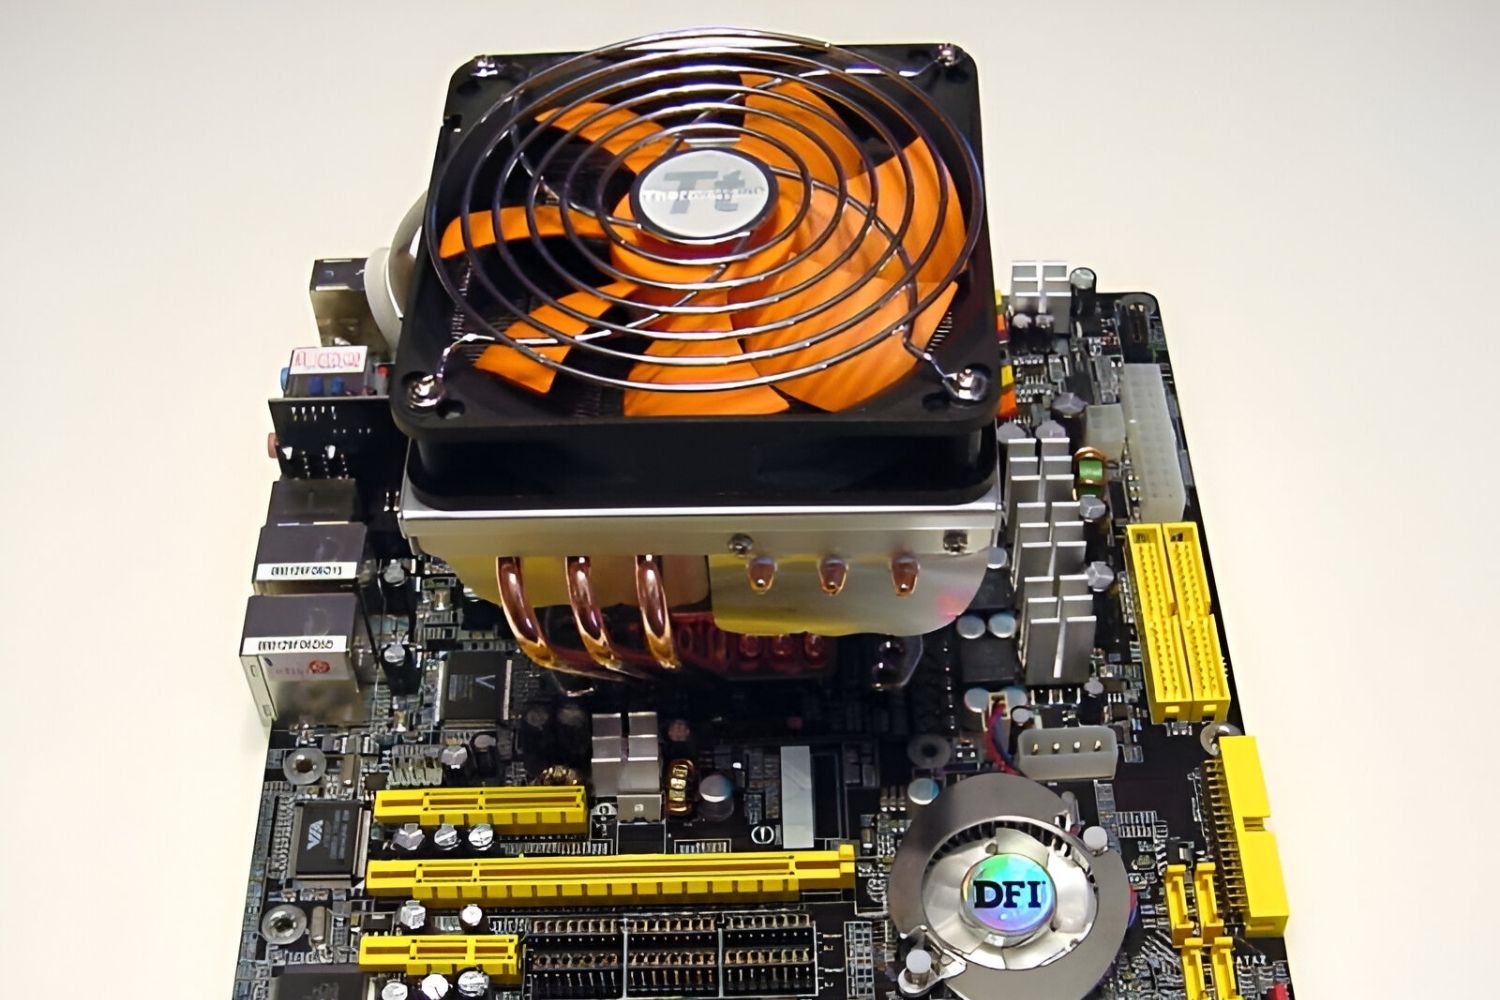 How To Attach Big Typhoon CPU Cooler On D975XBX2 Board With